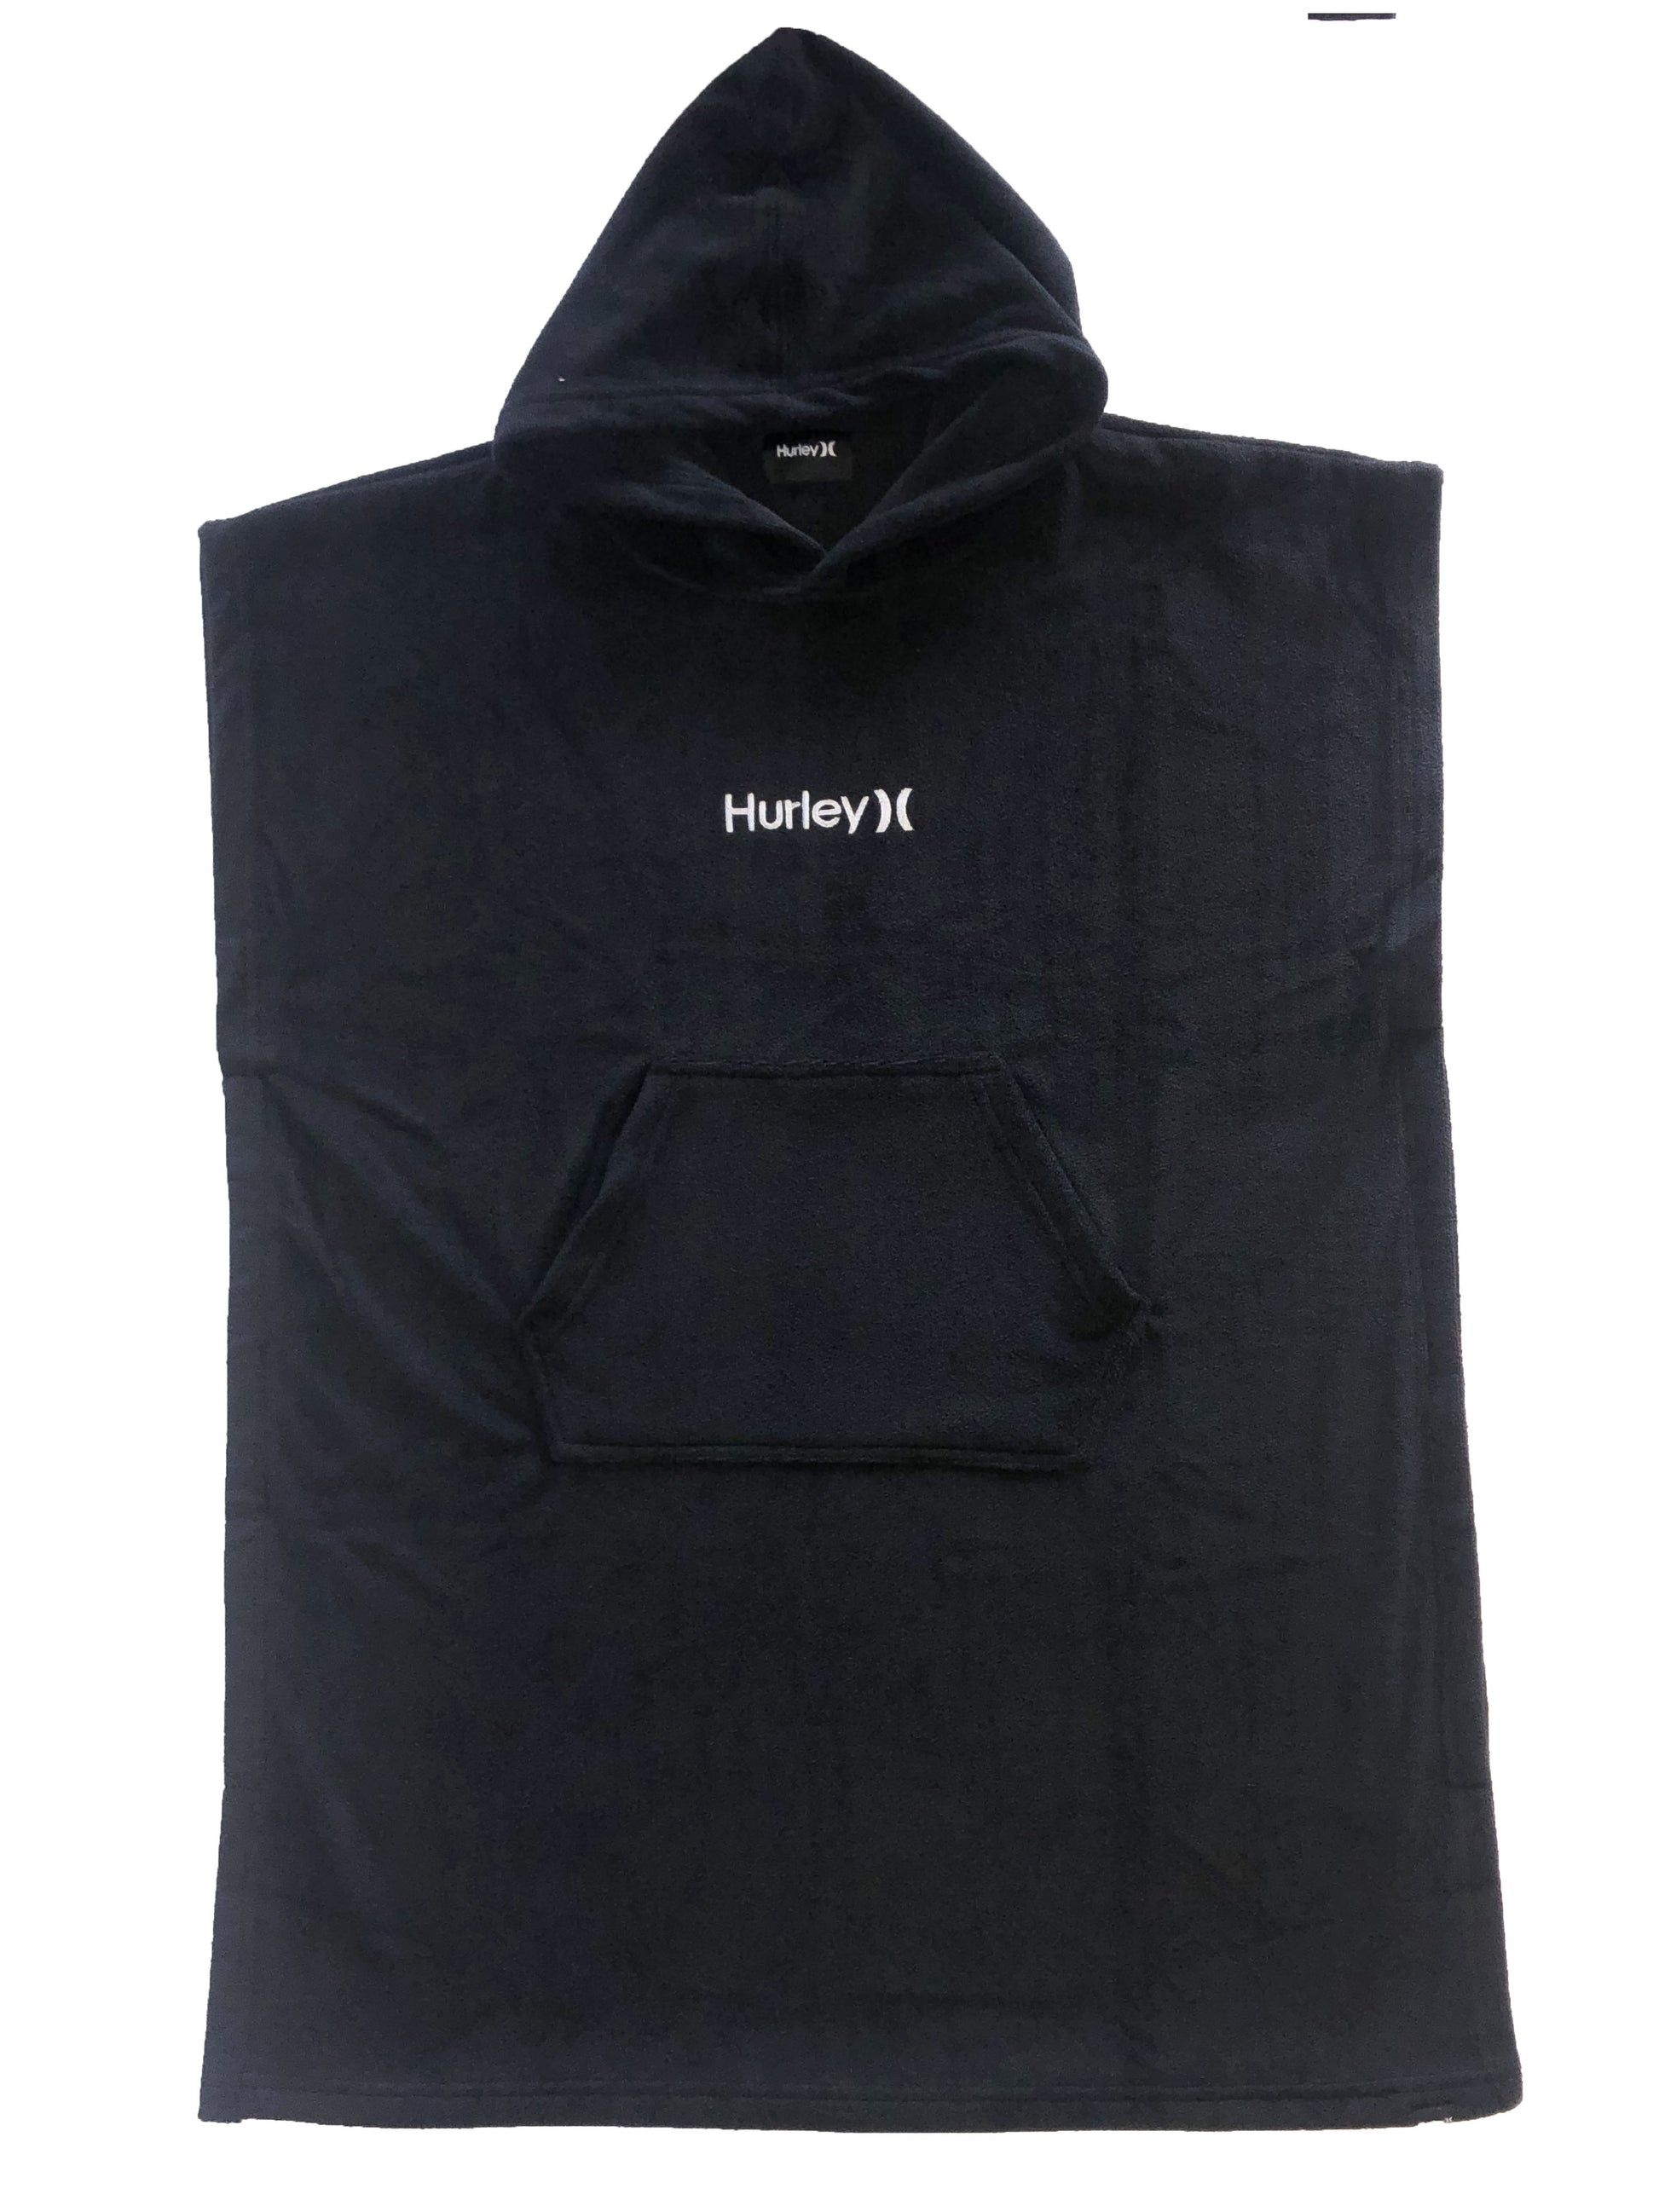 Hurley One And Only Youth Hooded Towel - Sum22 black hooded towel with front pocket 